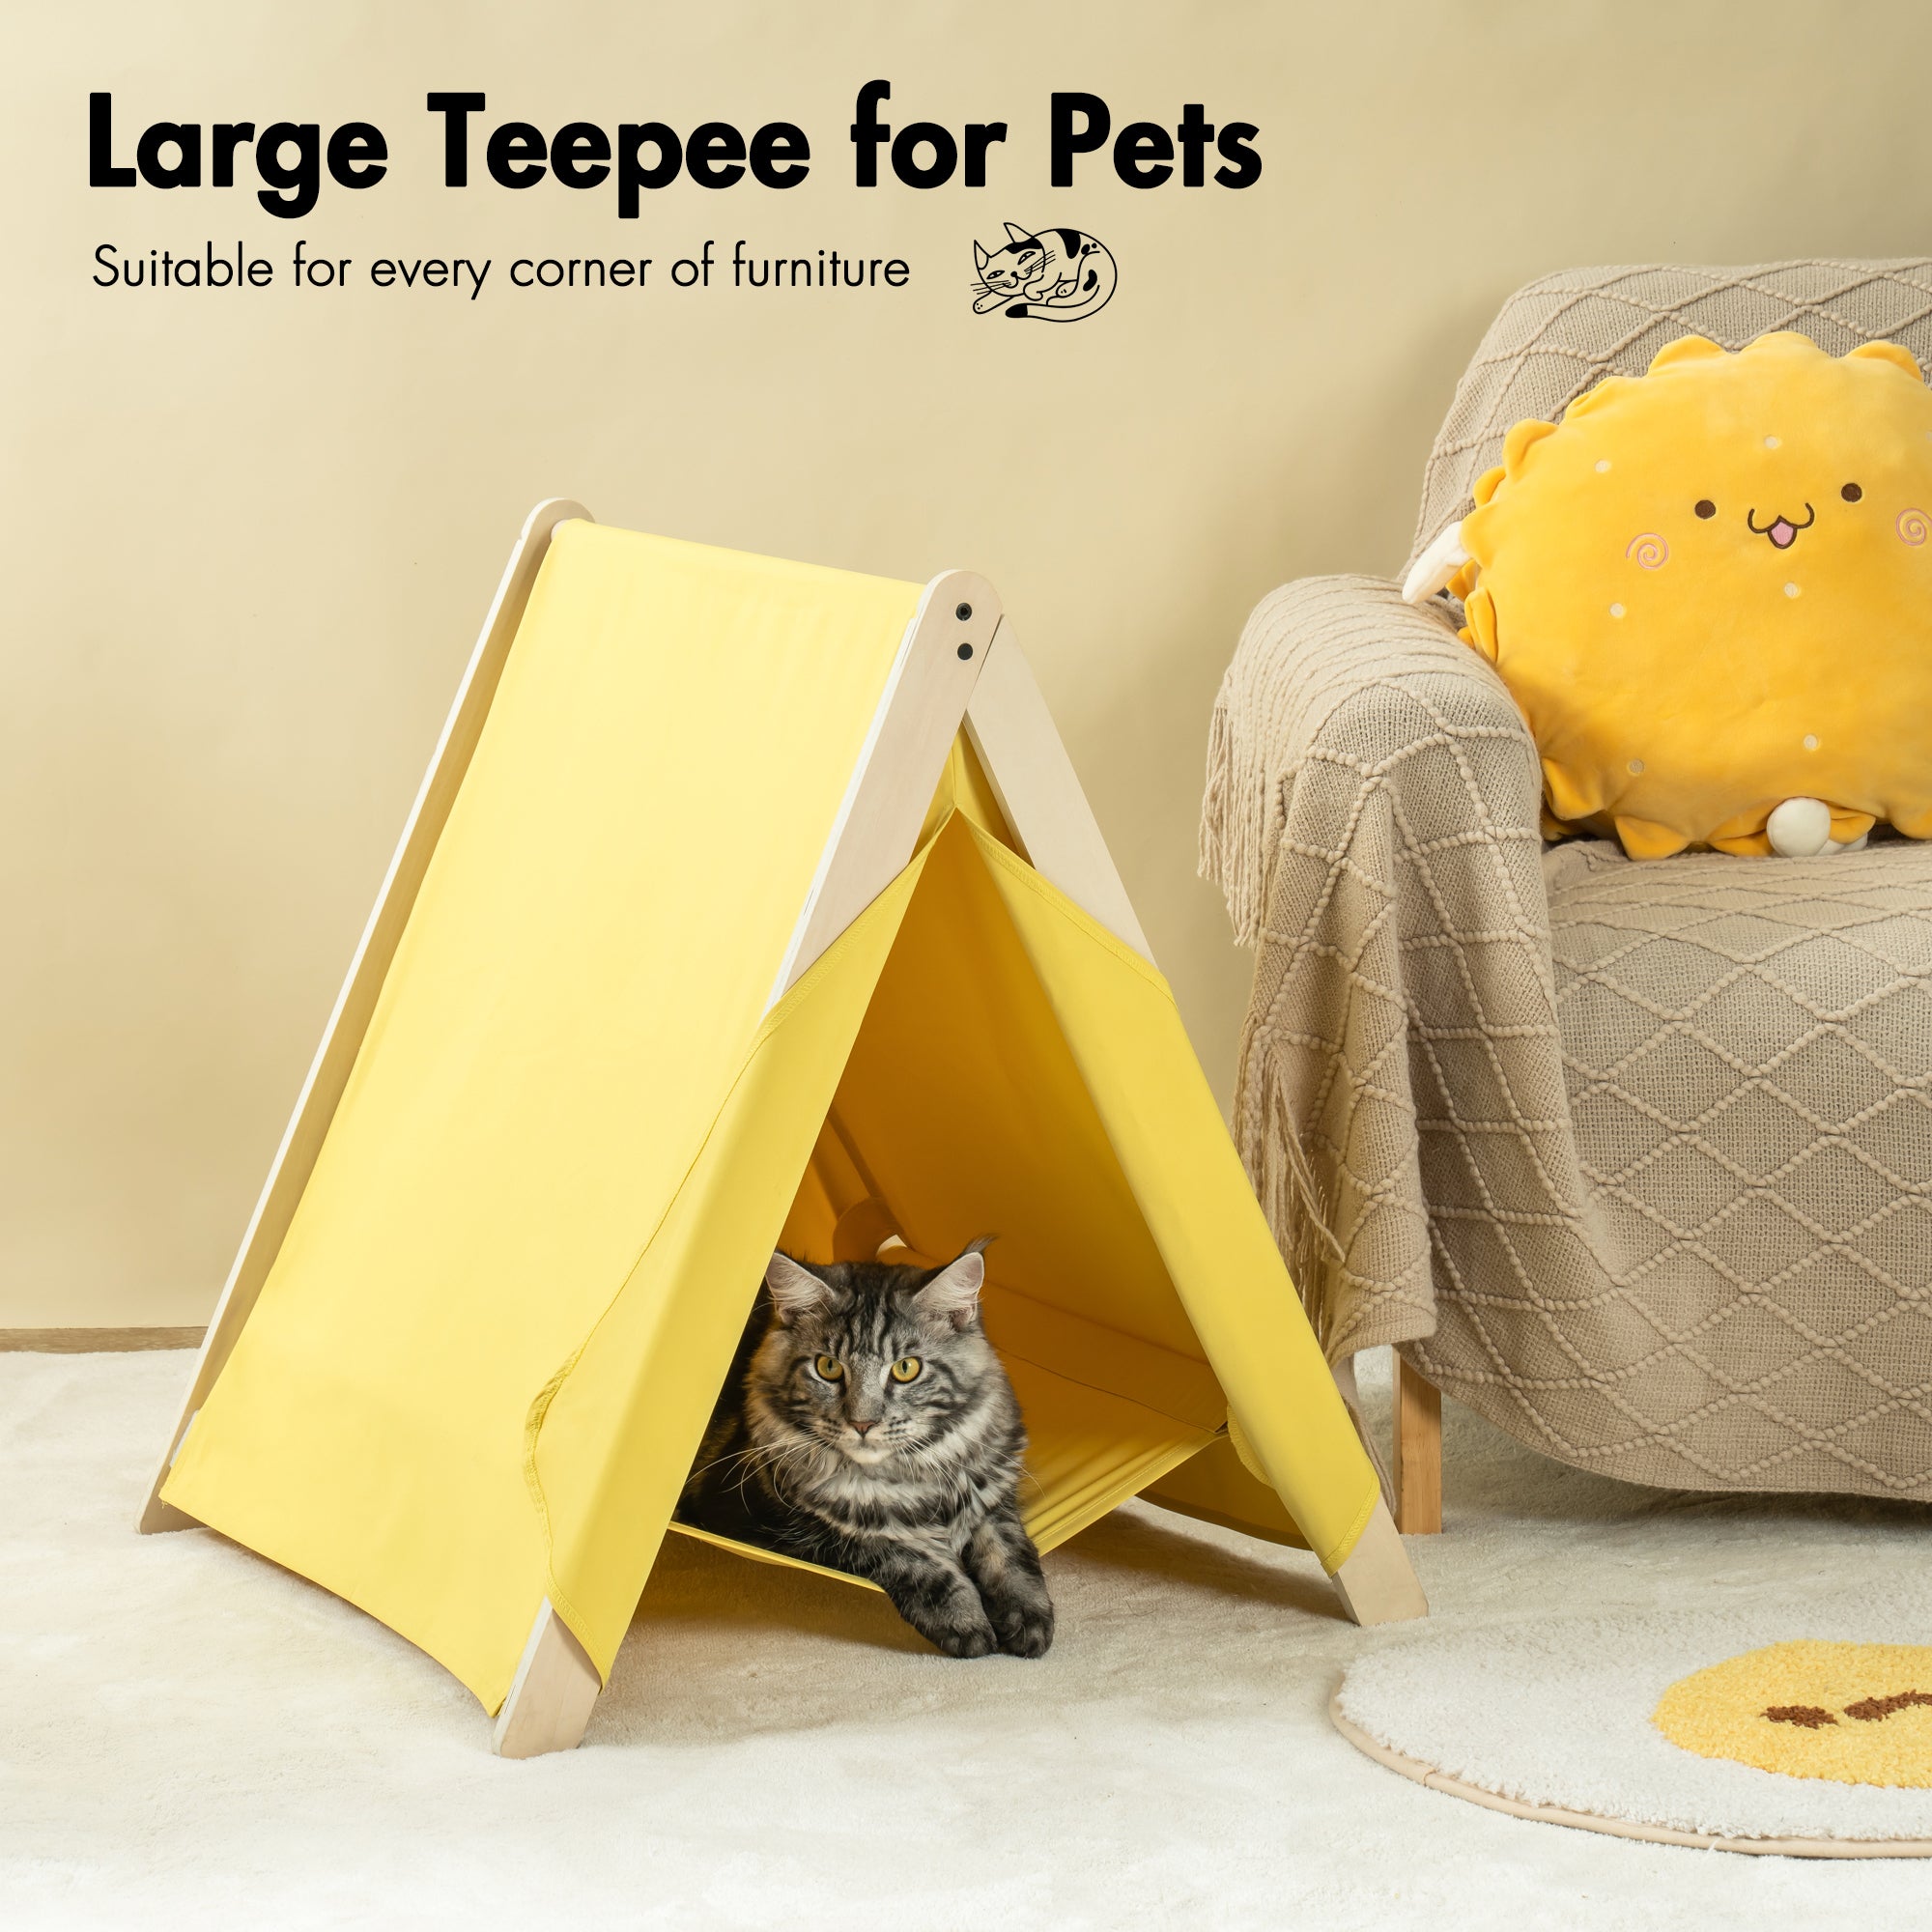 Pet Tent, Cat Tent for Indoor Cats, Wooden Cat House yellow-solid wood